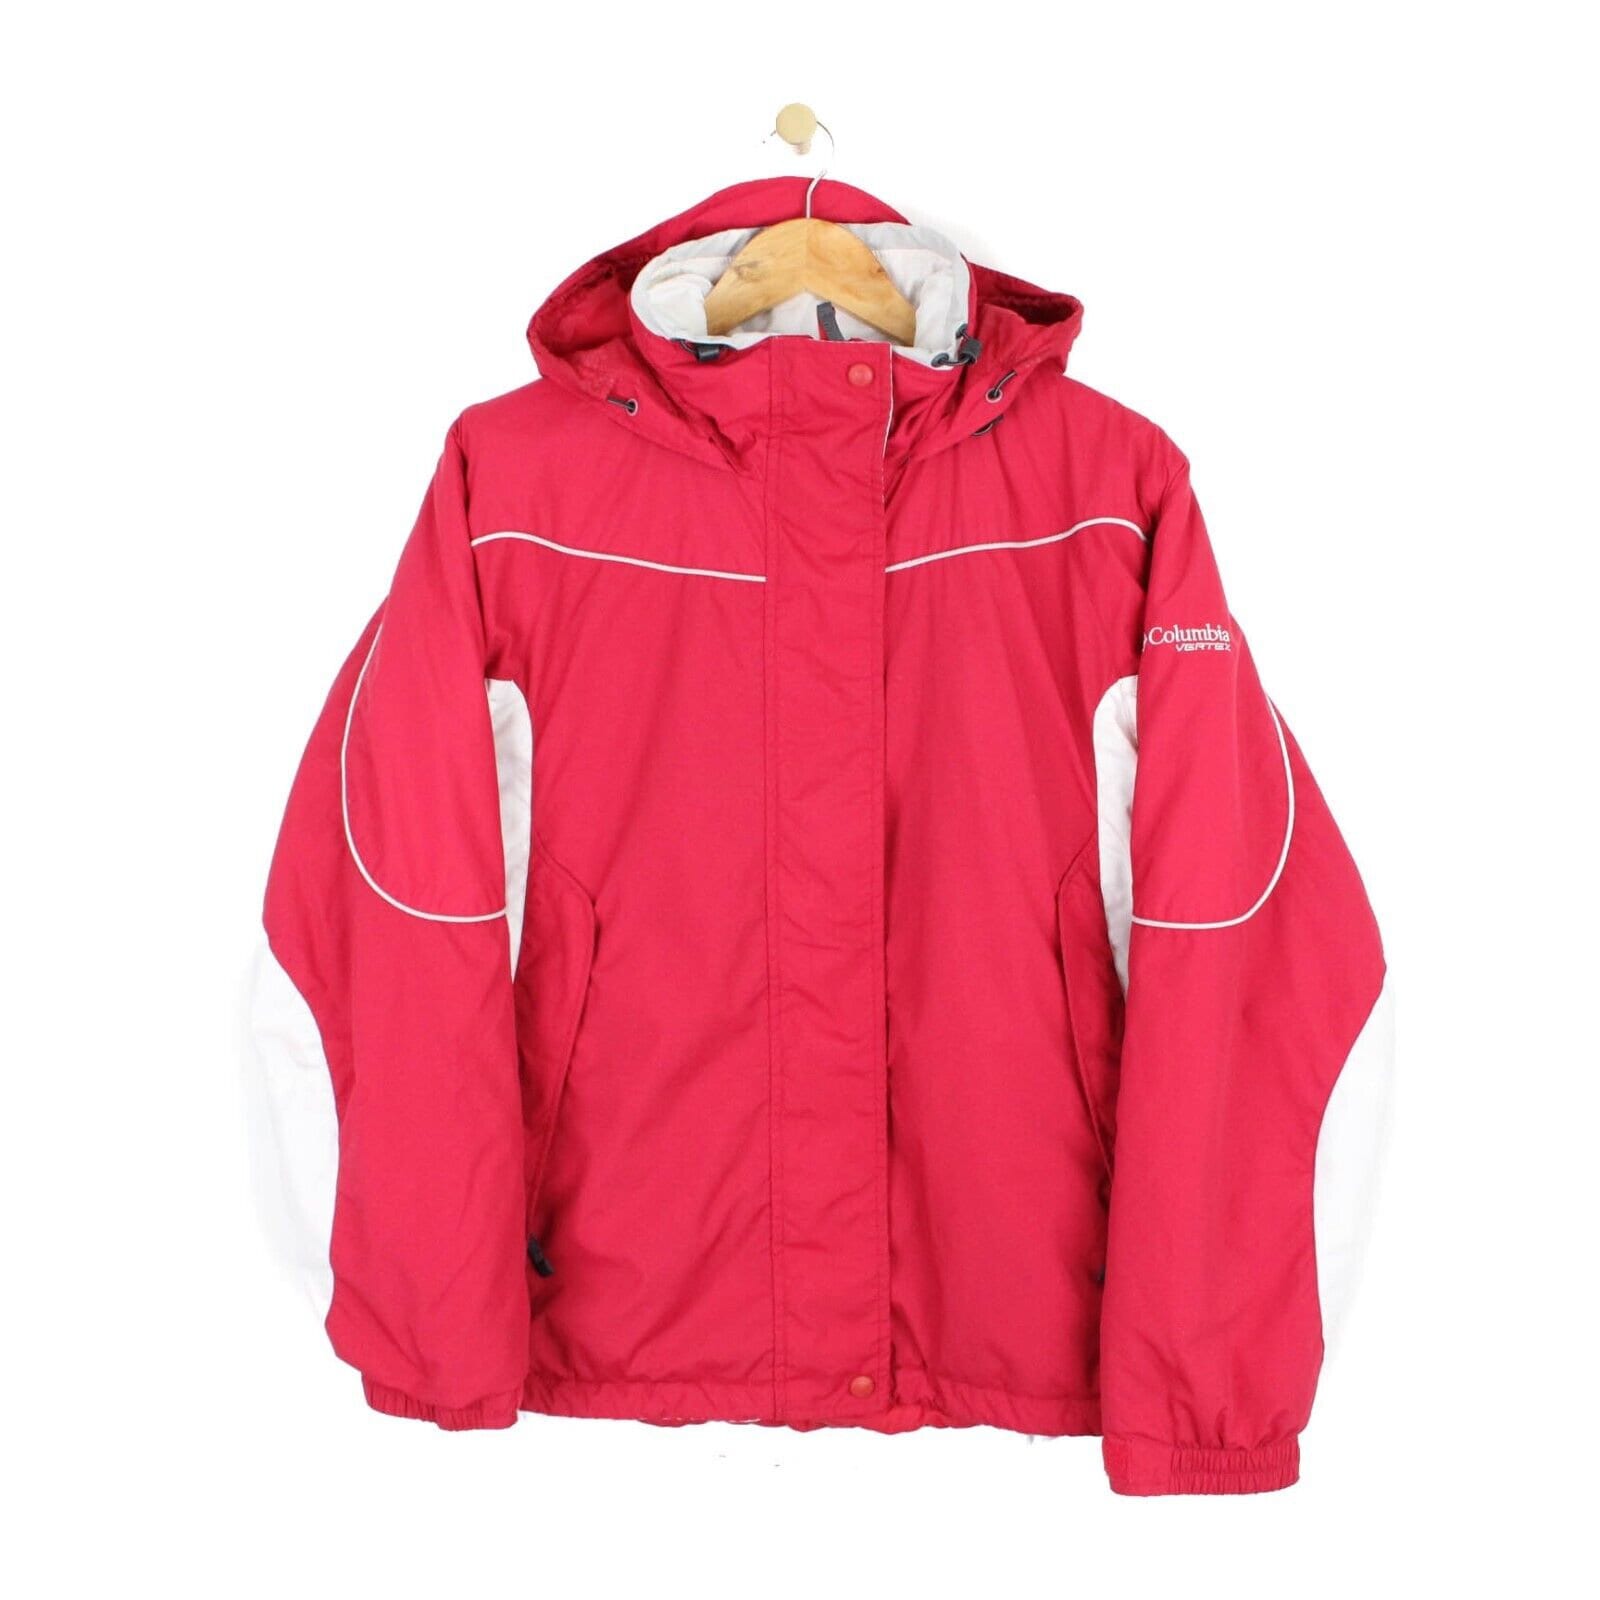 Columbia Vertex Jacket Water Resistant Coat Insulated Red Hooded 